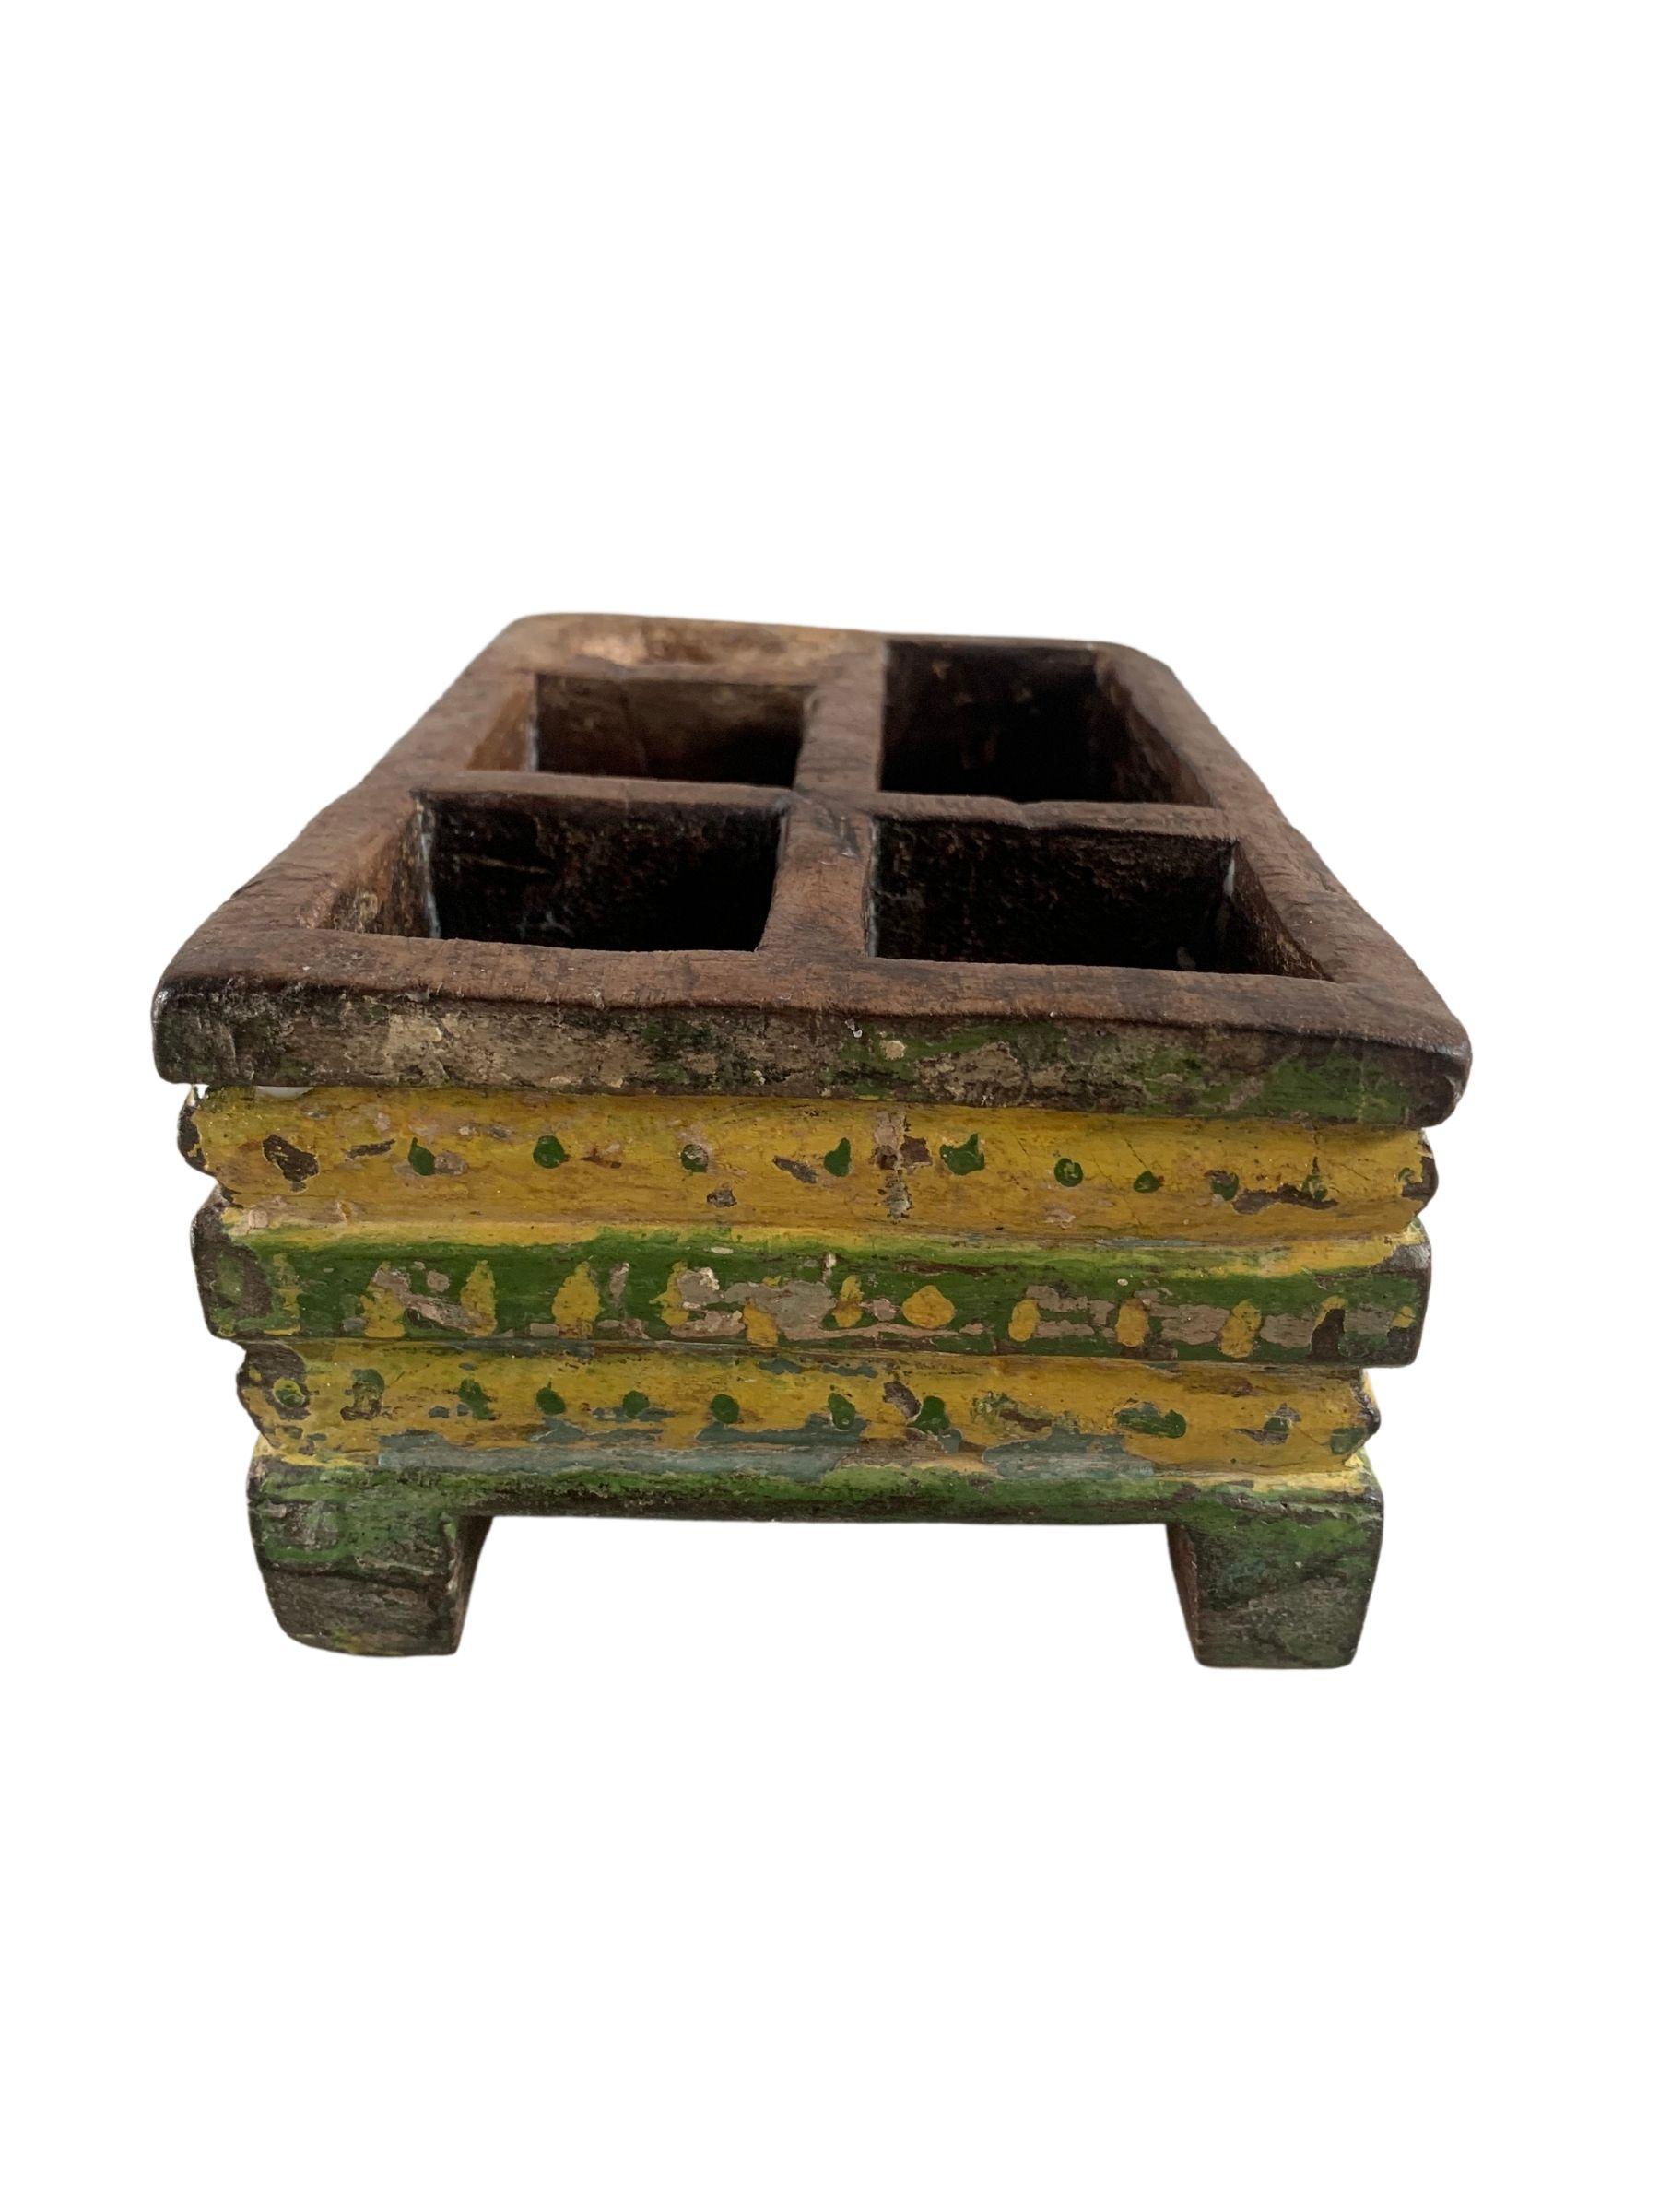 Betel Nut Box from Java with Polychromed Finish, Indonesia, c. 1900 In Good Condition For Sale In Jimbaran, Bali